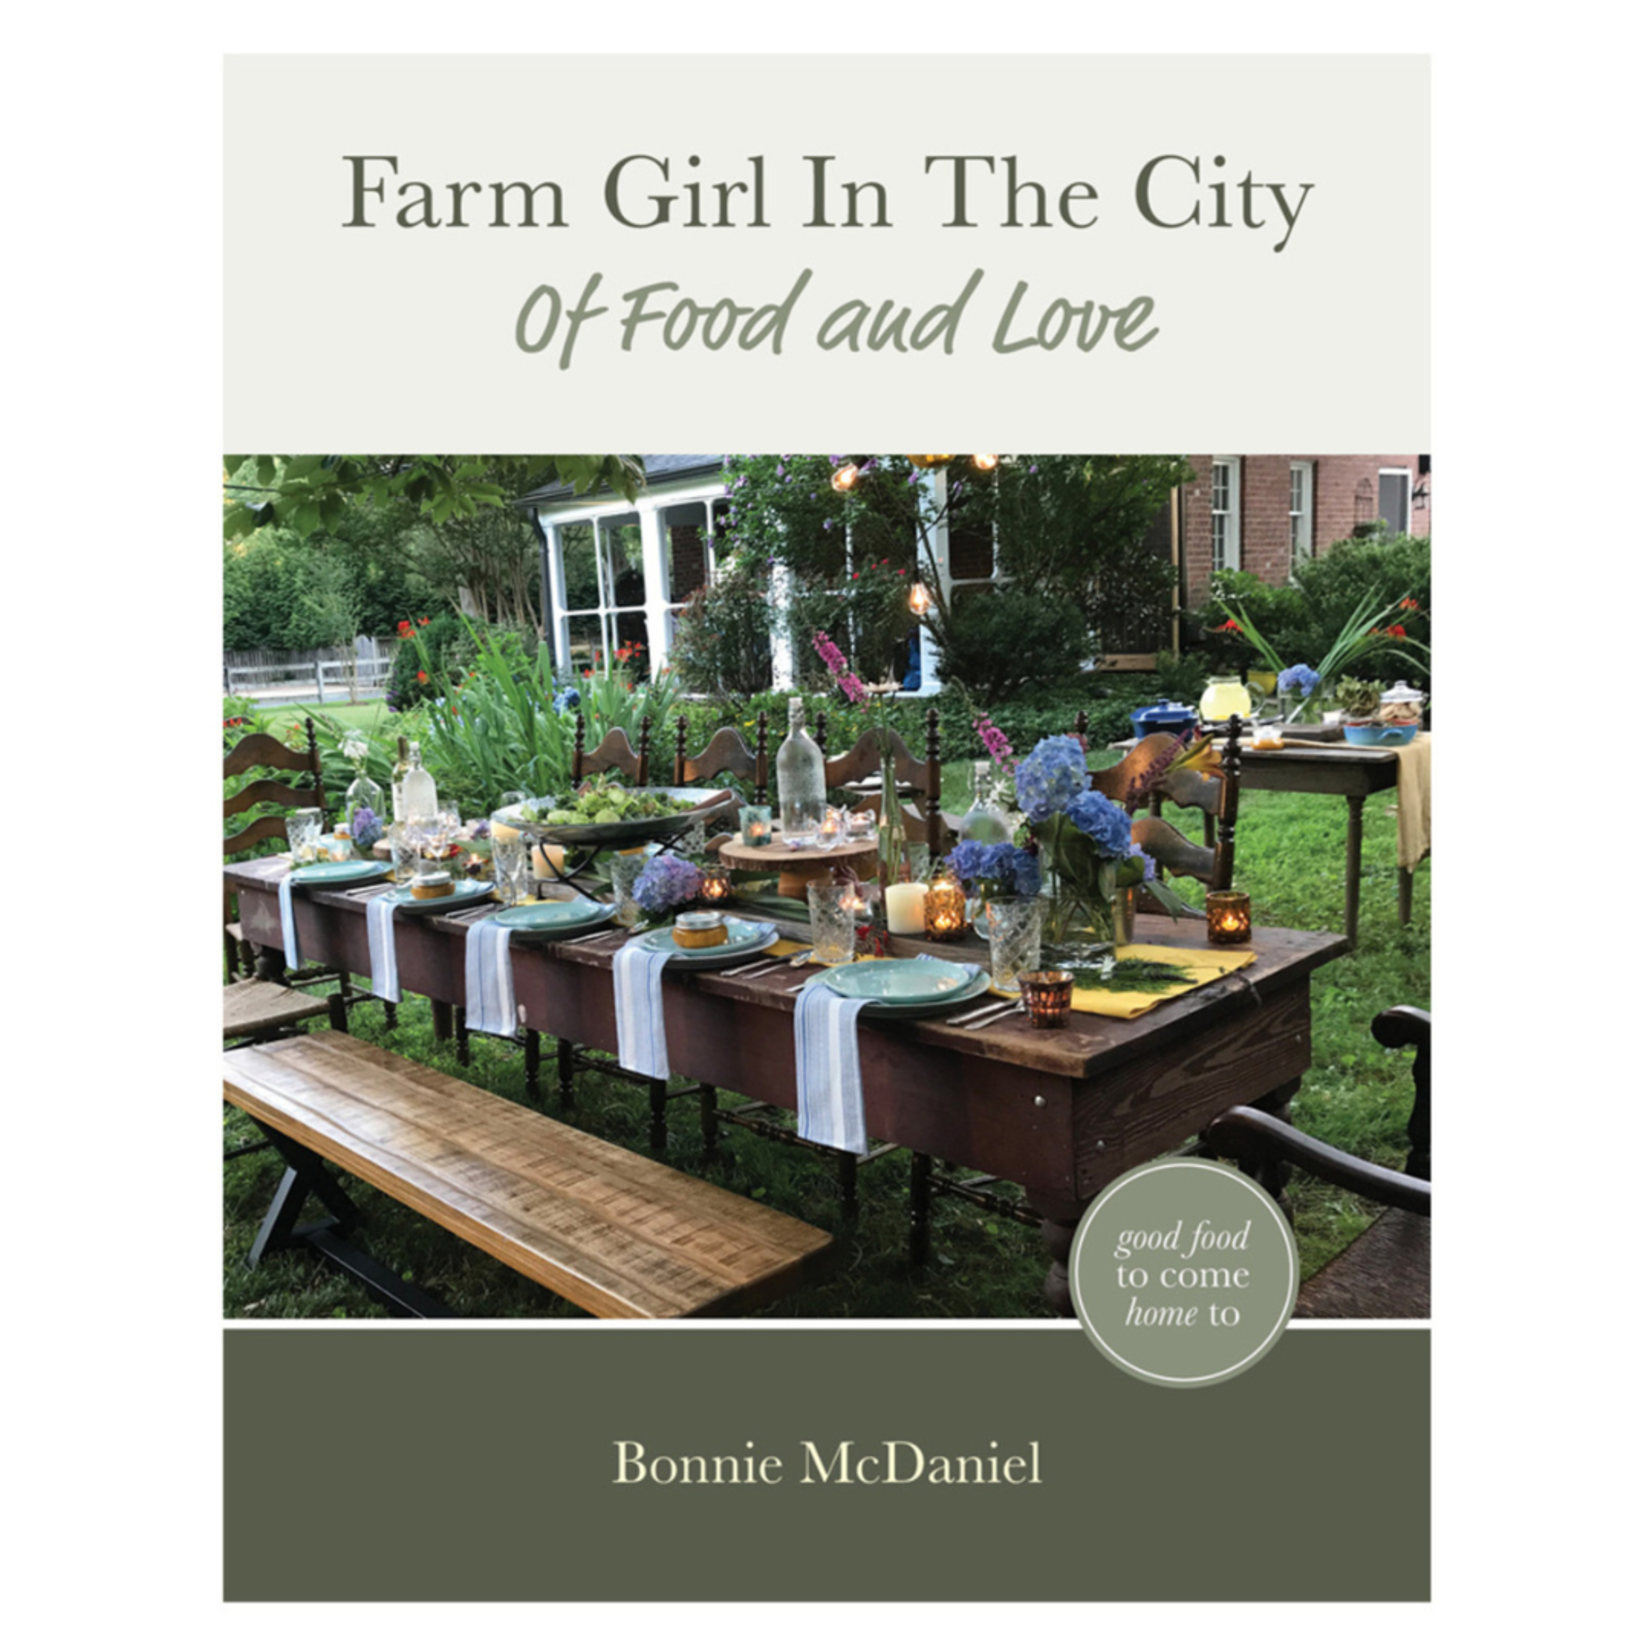 Farm Girl in the City: Of Food and Love